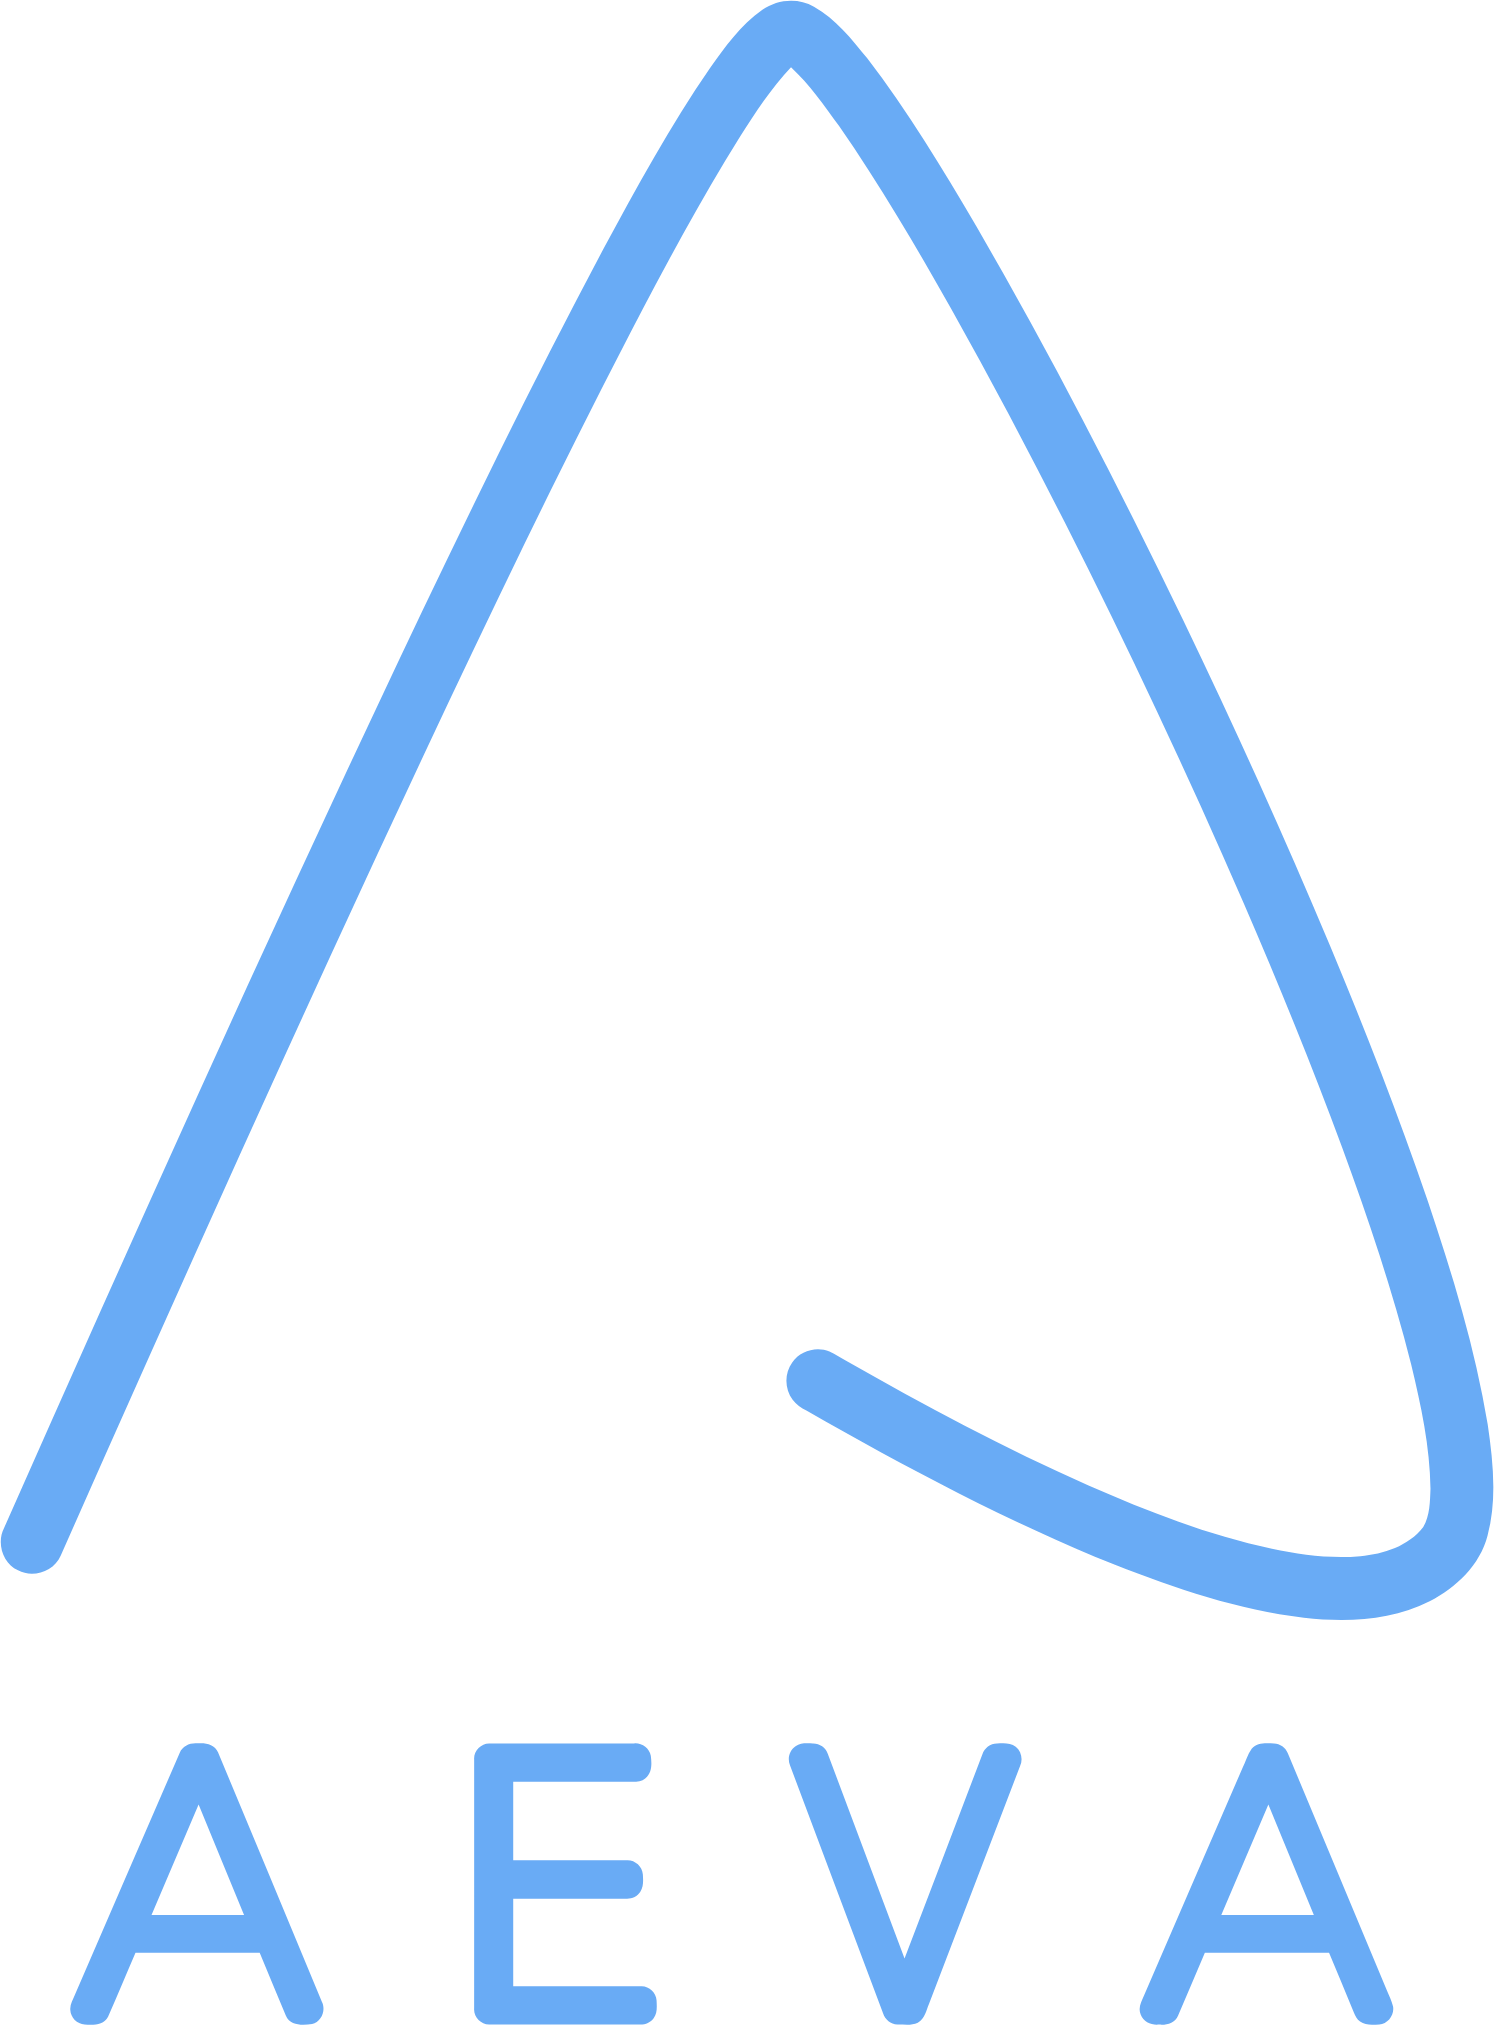 Aeva Technologies logo in transparent PNG and vectorized SVG formats